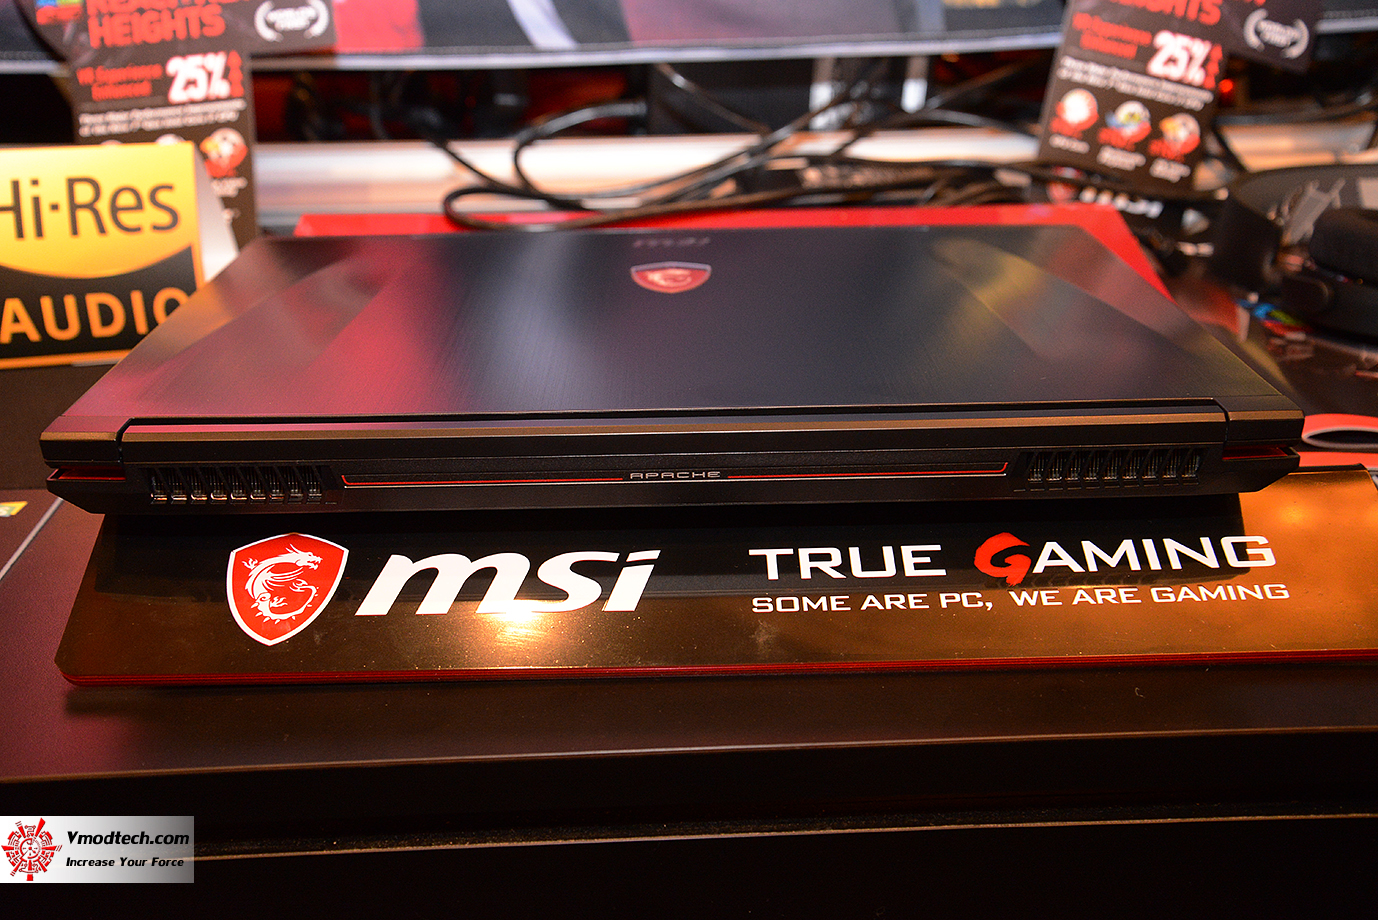 dsc 1849 MSI GAMING NOTEBOOK CES2017 LAS VEGAS PREVIEW